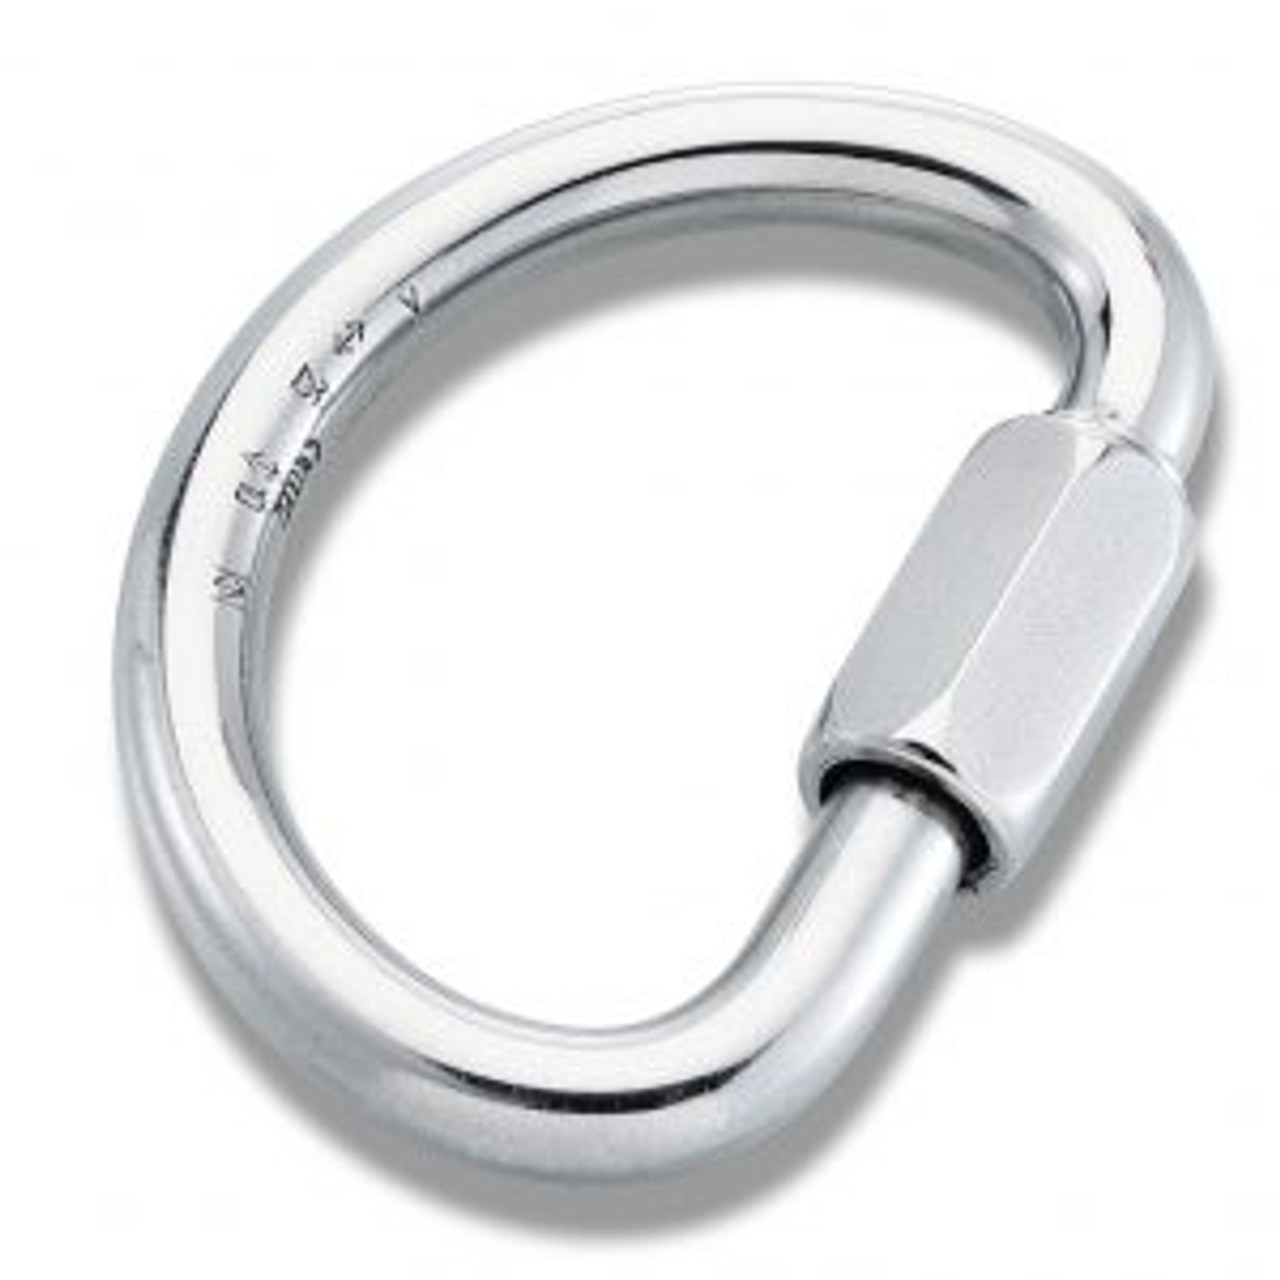 Maillon Rapide Half Moon 9.5 mm Quick Link PPE